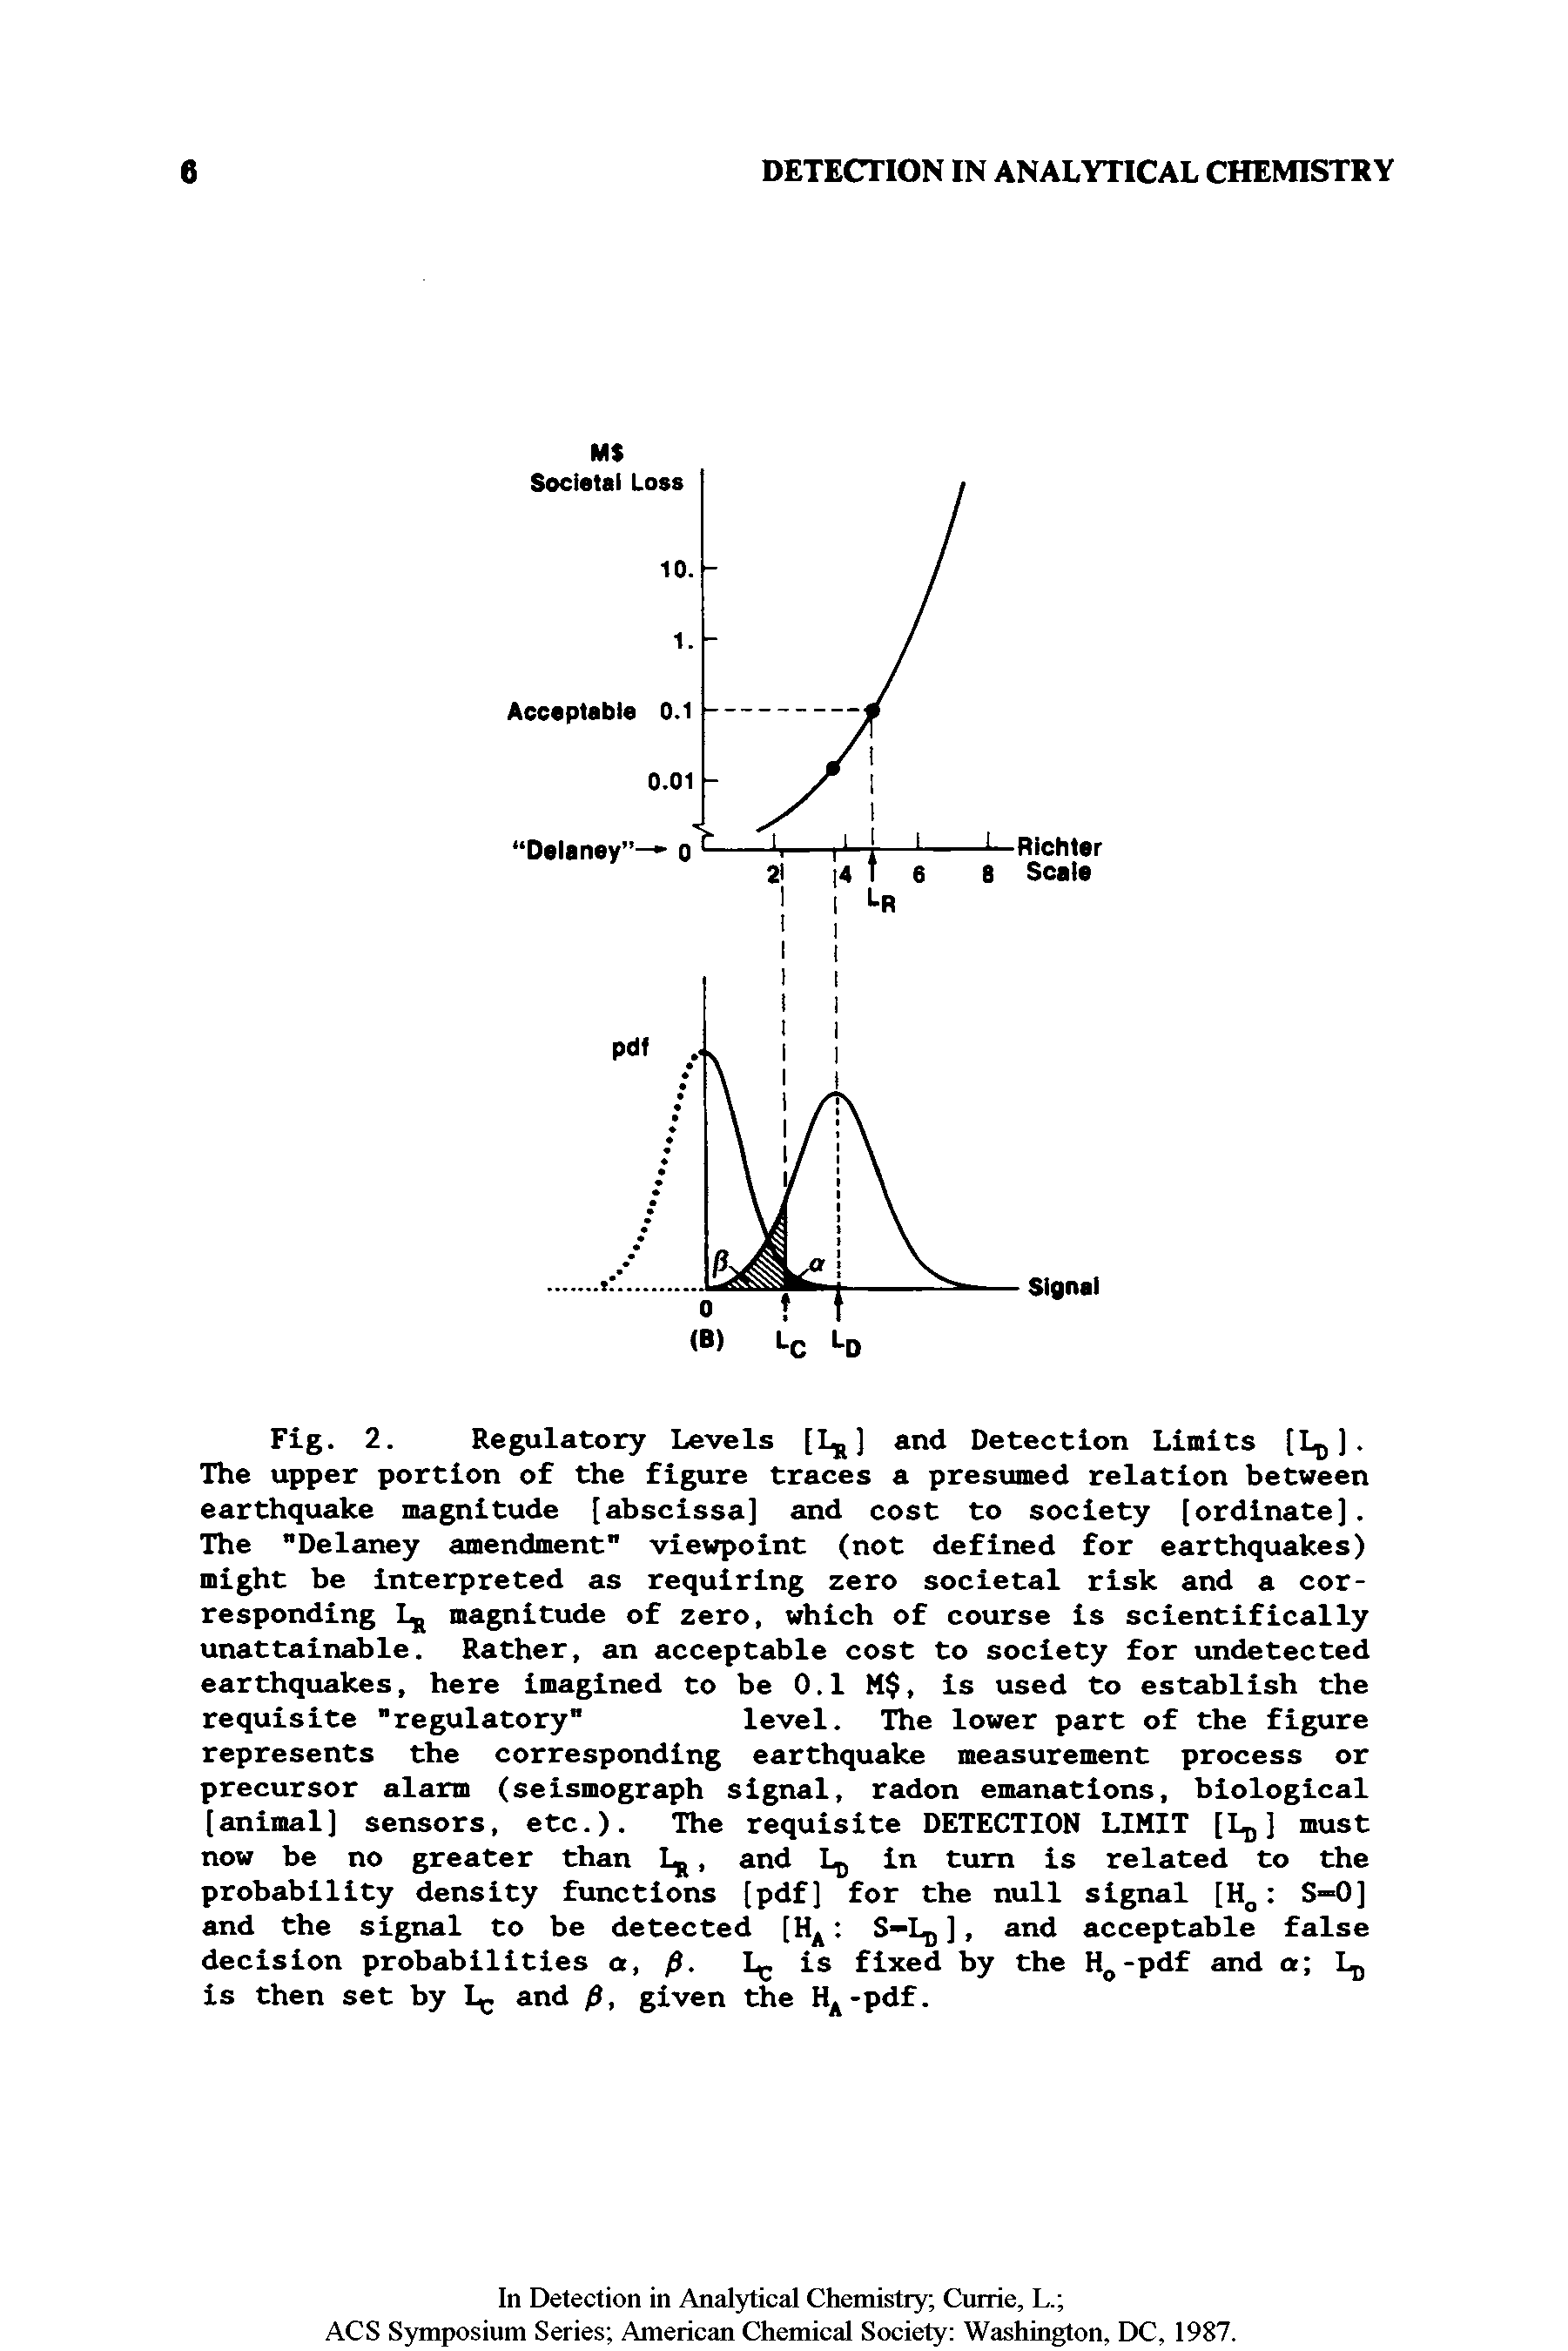 Fig. 2. Regulatory Levels [1 ] and Detection Limits (Lj,). The upper portion of the figure traces a presumed relation between earthquake magnitude [abscissa] and cost to society [ordinate). The "Delaney amendment" viewpoint (not defined for earthquakes) might be interpreted as requiring zero societal risk and a corresponding Ij magnitude of zero, which of course is scientifically unattainable. Rather, an acceptable cost to society for undetected earthquakes, here imagined to be 0.1 M, is used to establish the requisite "regulatory" level. The lower part of the figure...